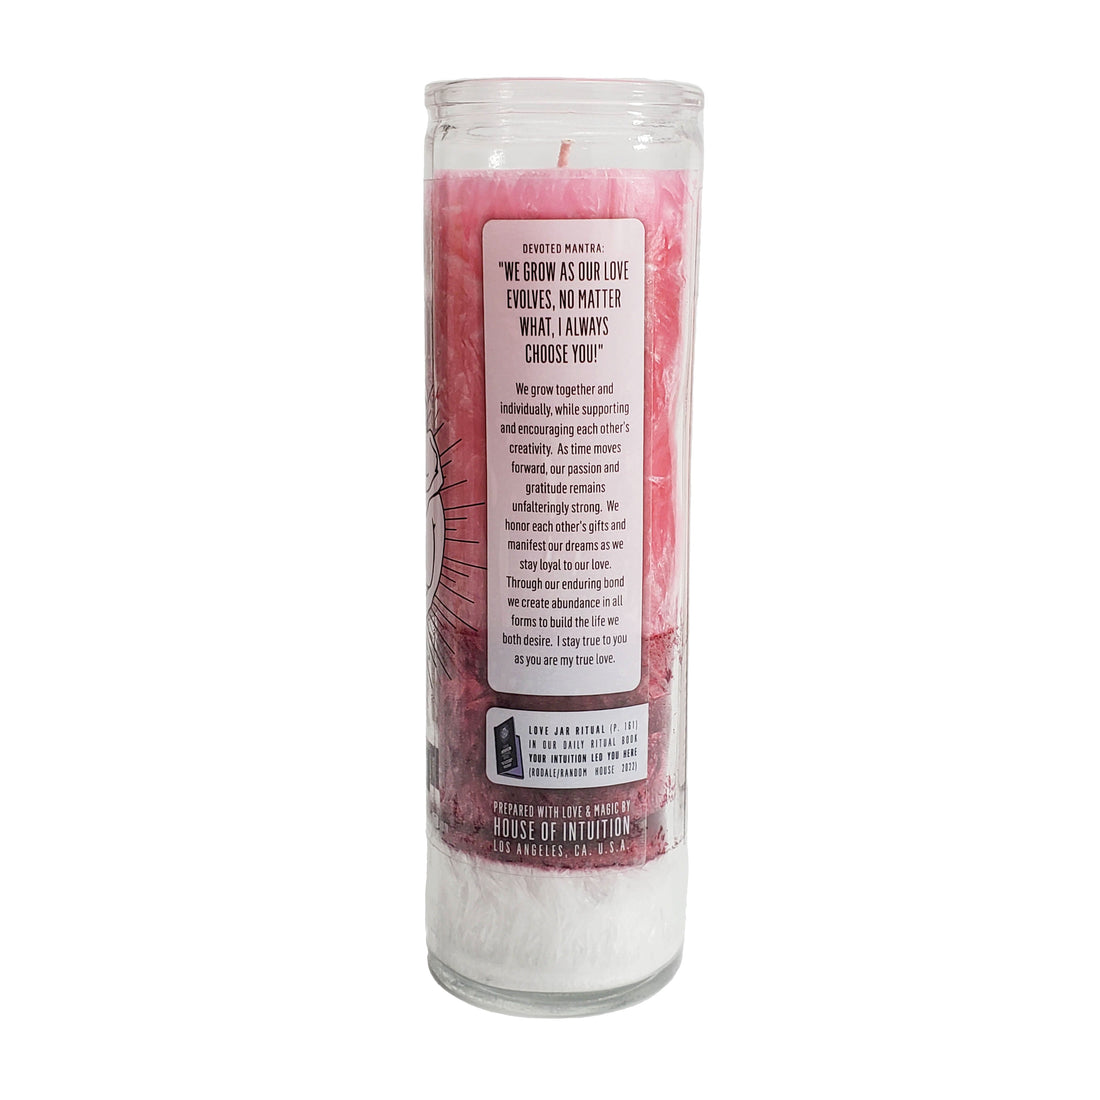 BONDED BY LOVE Couples Magic Candle Limited Edition Candles House of Intuition 